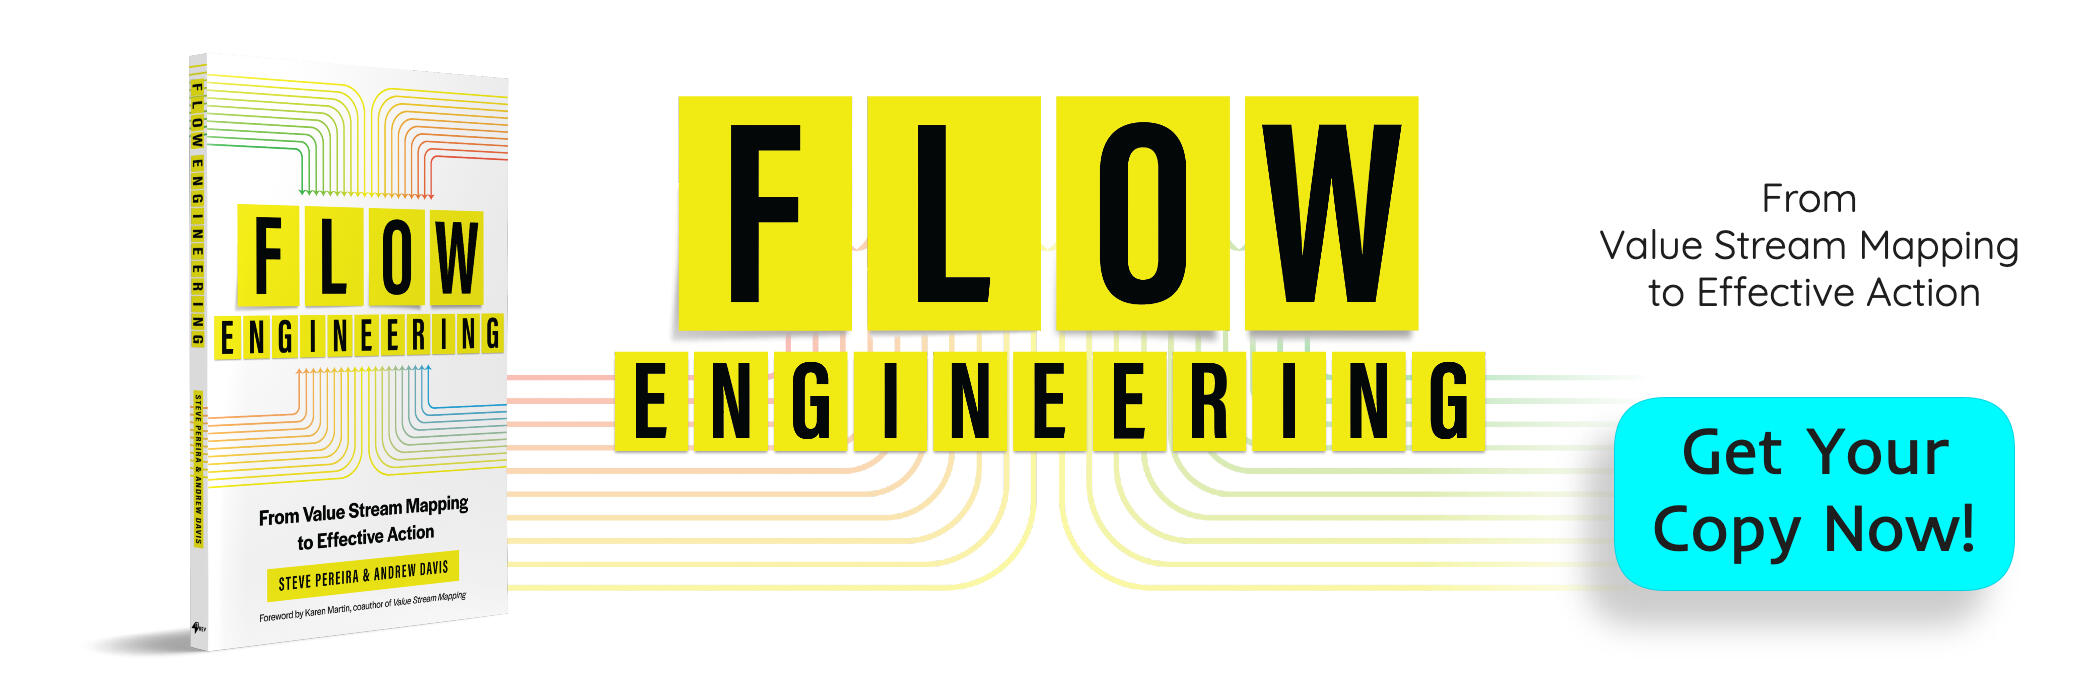 Visible Value Stream Consulting - Flow Engineering